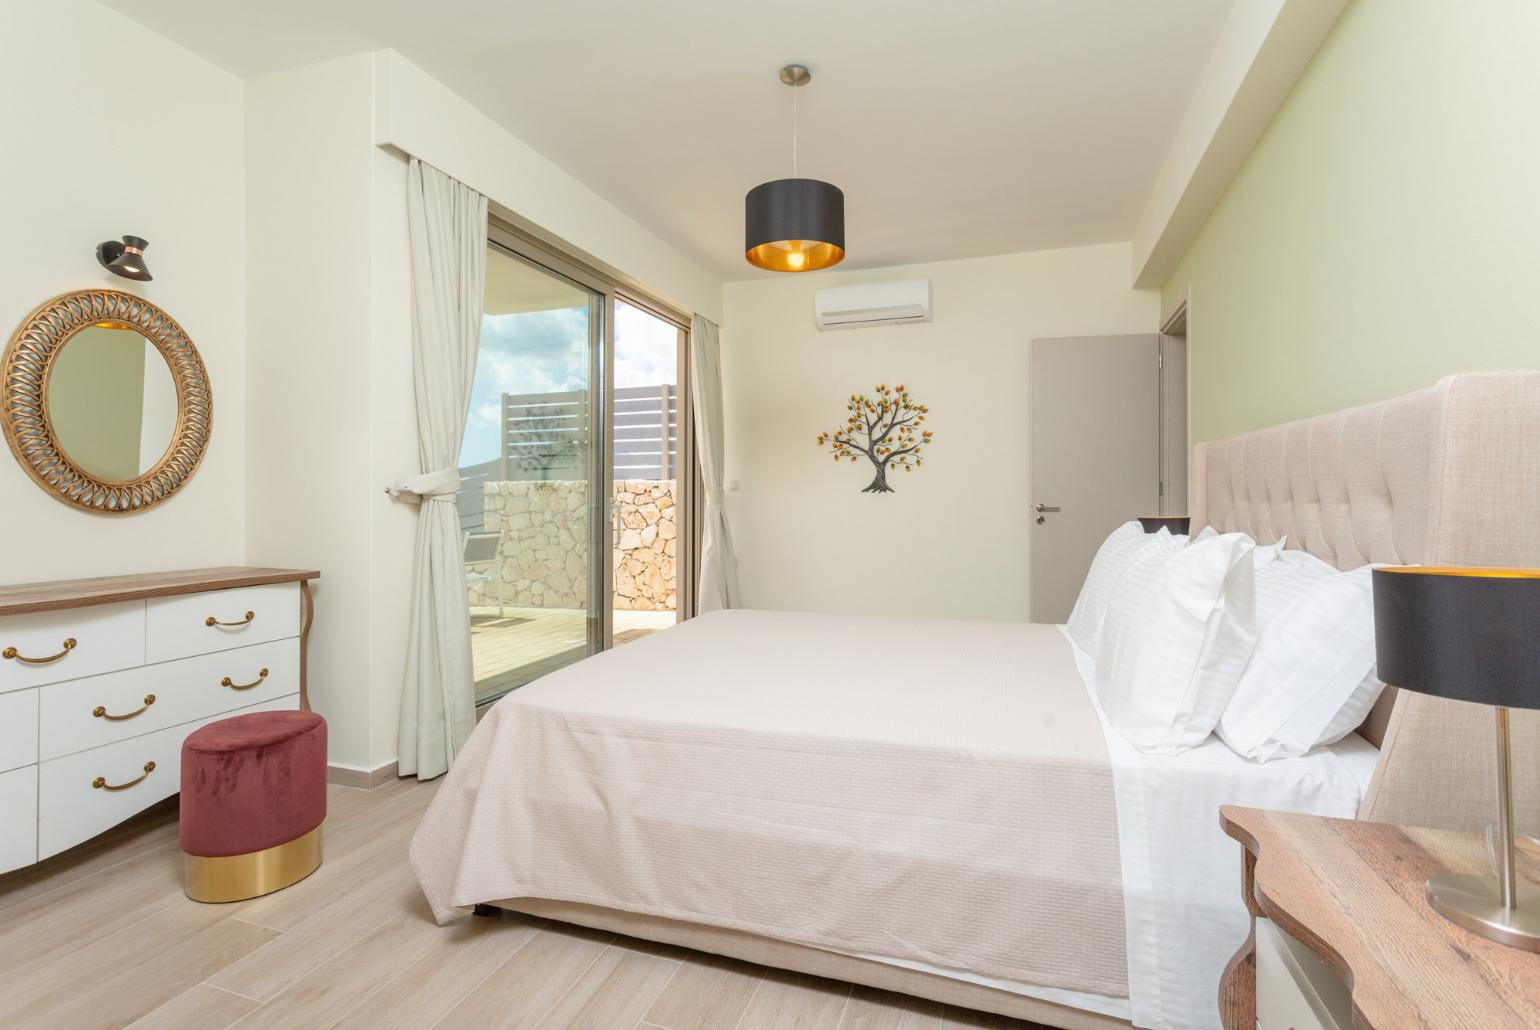 Double bedroom with en suite bathroom, A/C, and terrace access with sea views